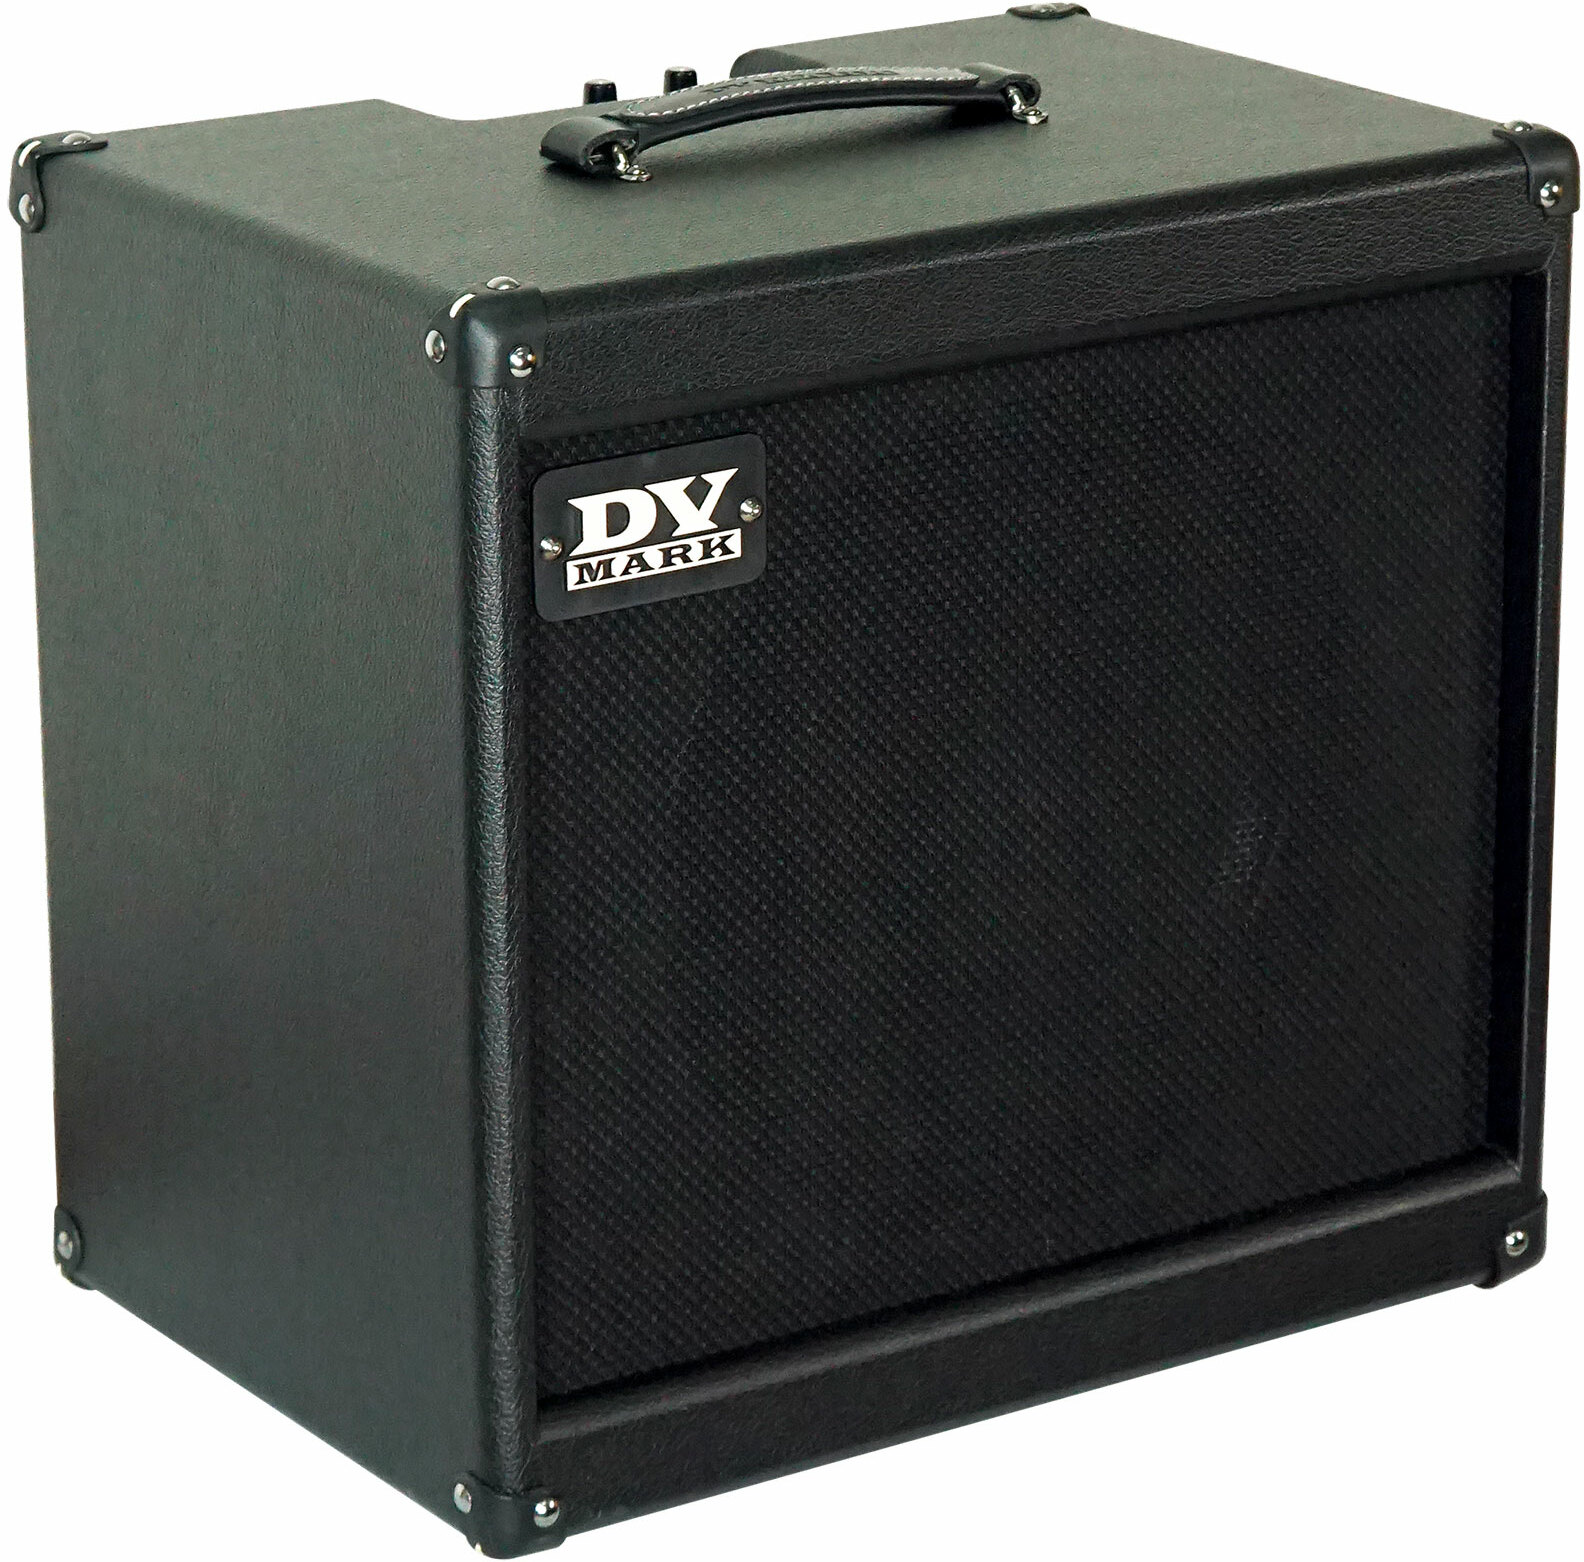 Dv Mark Dv Powered Cab 112/60 1x12 60w - Electric guitar amp cabinet - Main picture